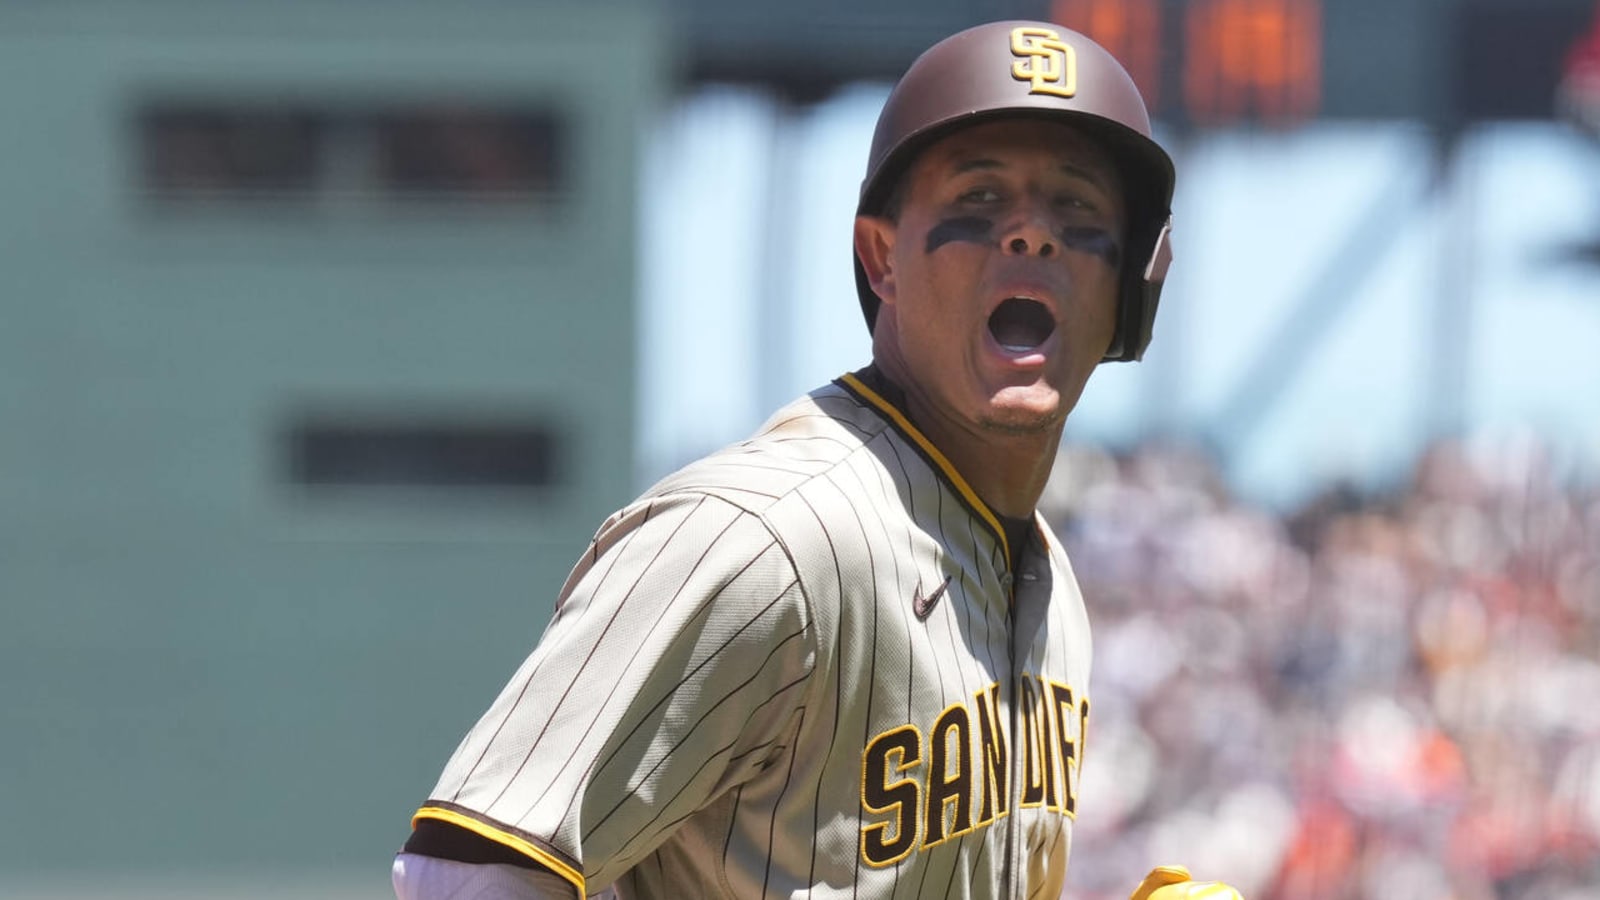 Got the mind right': Padres' Manny Machado ready to rebound in second half  after All-Star break